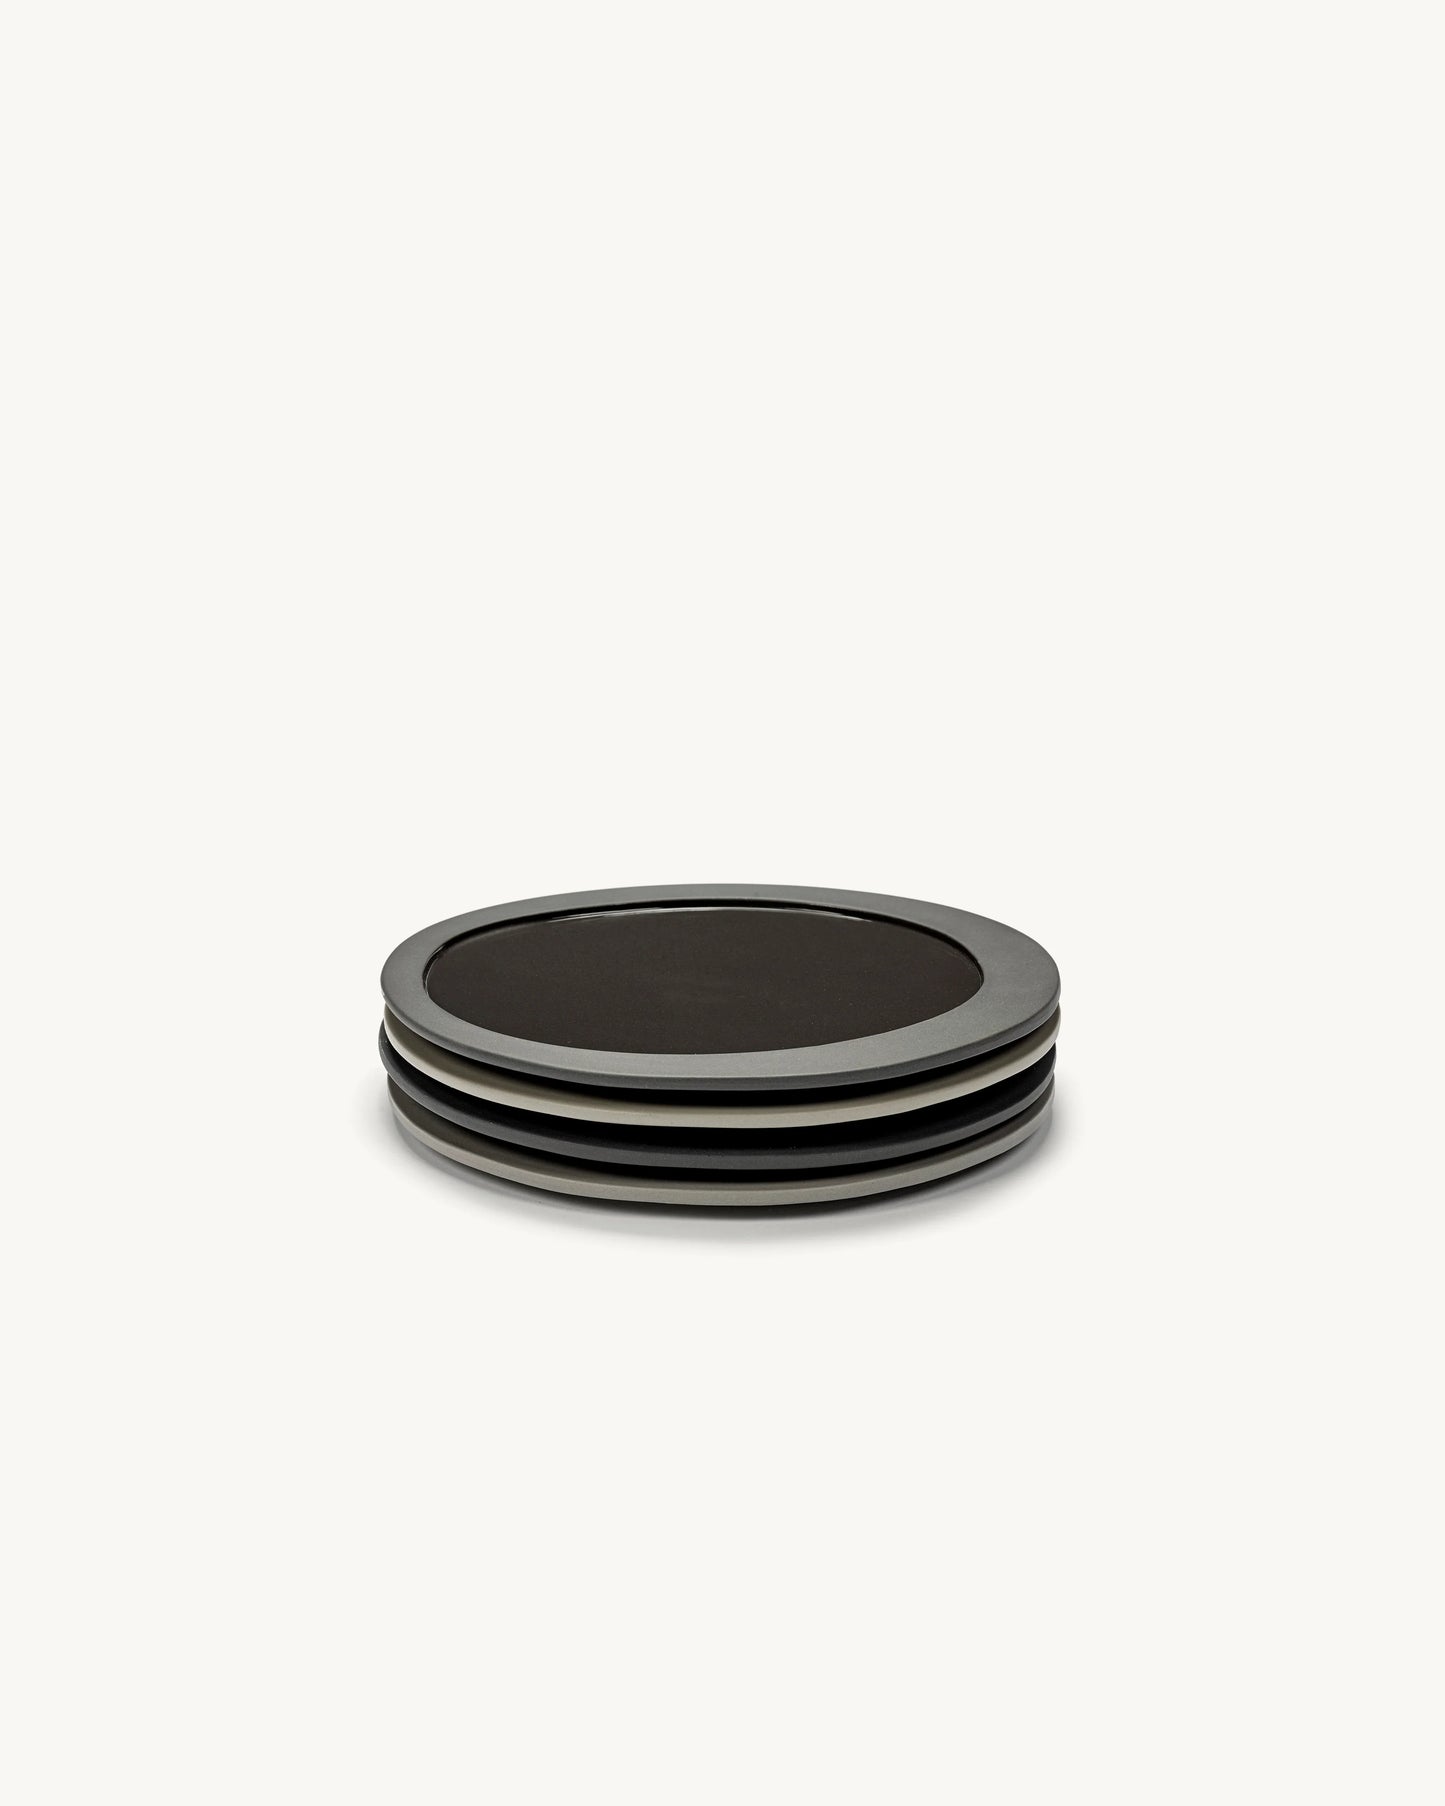 Valerie Objects Inner circle Small Plate, grey by Maarten Baas - $43.00